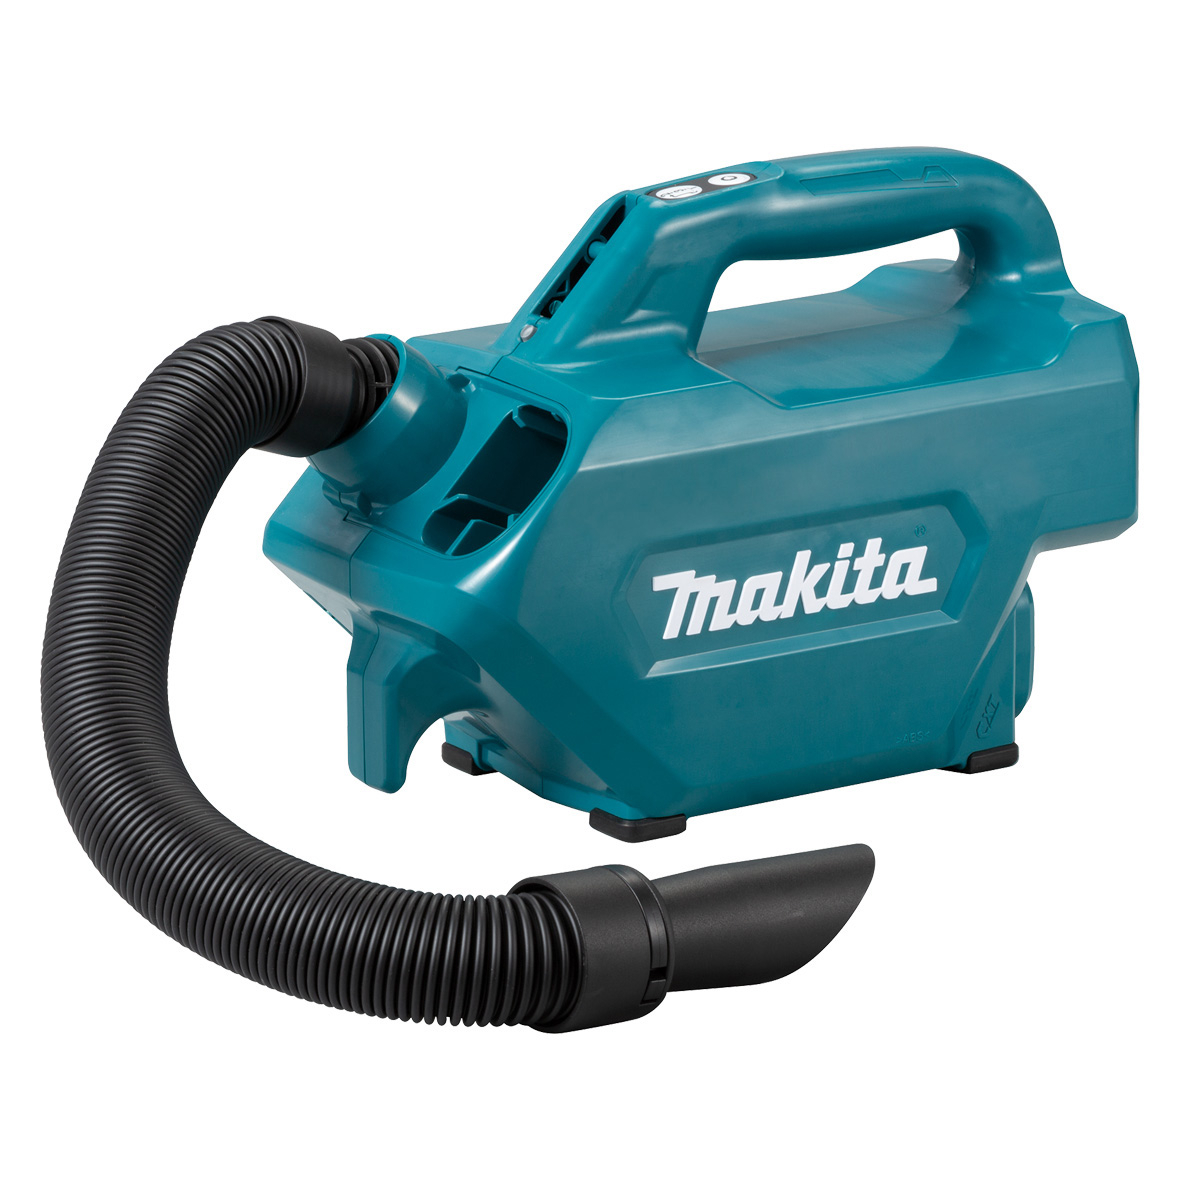 Makita 12V Automotive Vacuum Cleaner (tool only) CL121DZ